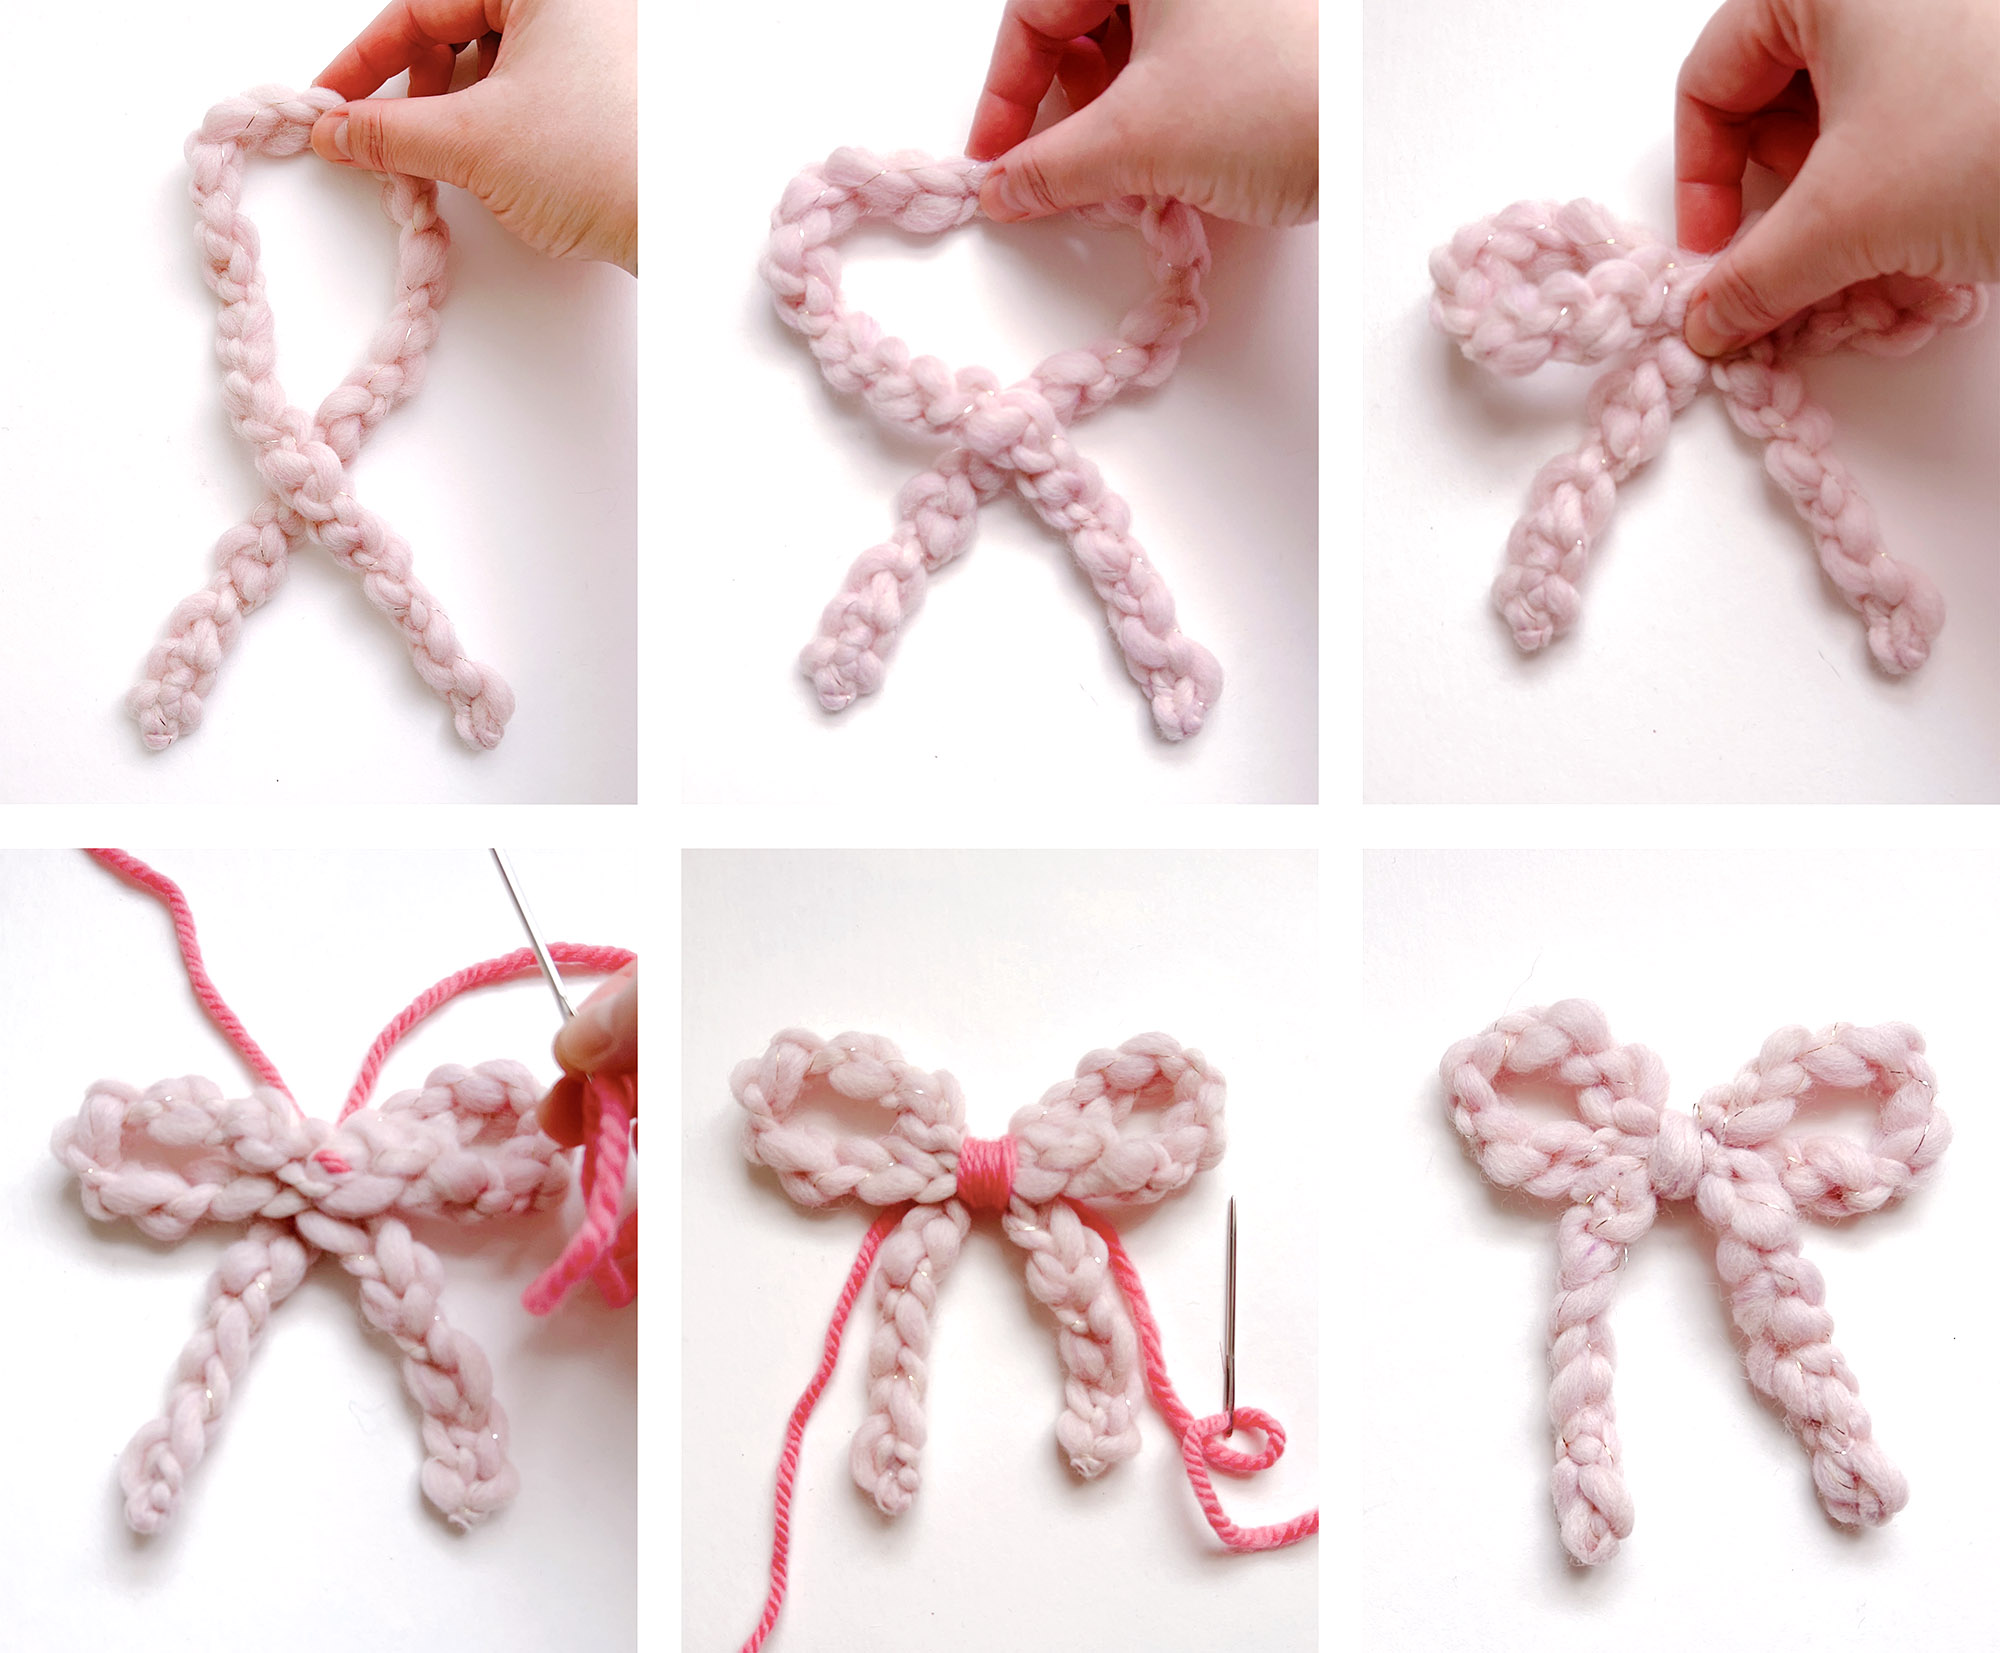 image of 6 photos showing how to form a bow with chunky pink yarn made of crocheted chains